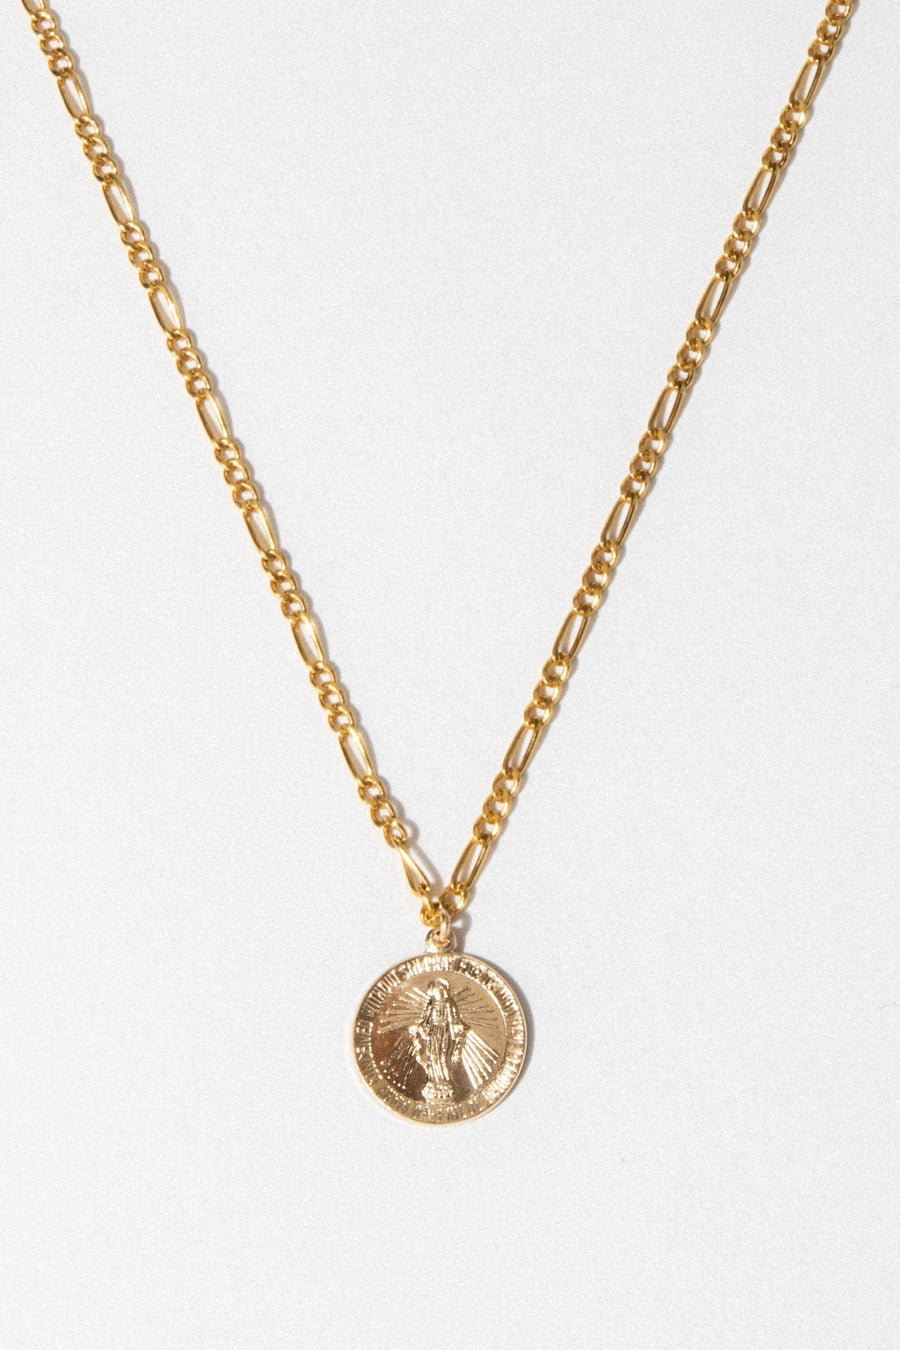 CGM Jewelry Gold / 20 Inches Pray for Us Mary Necklace